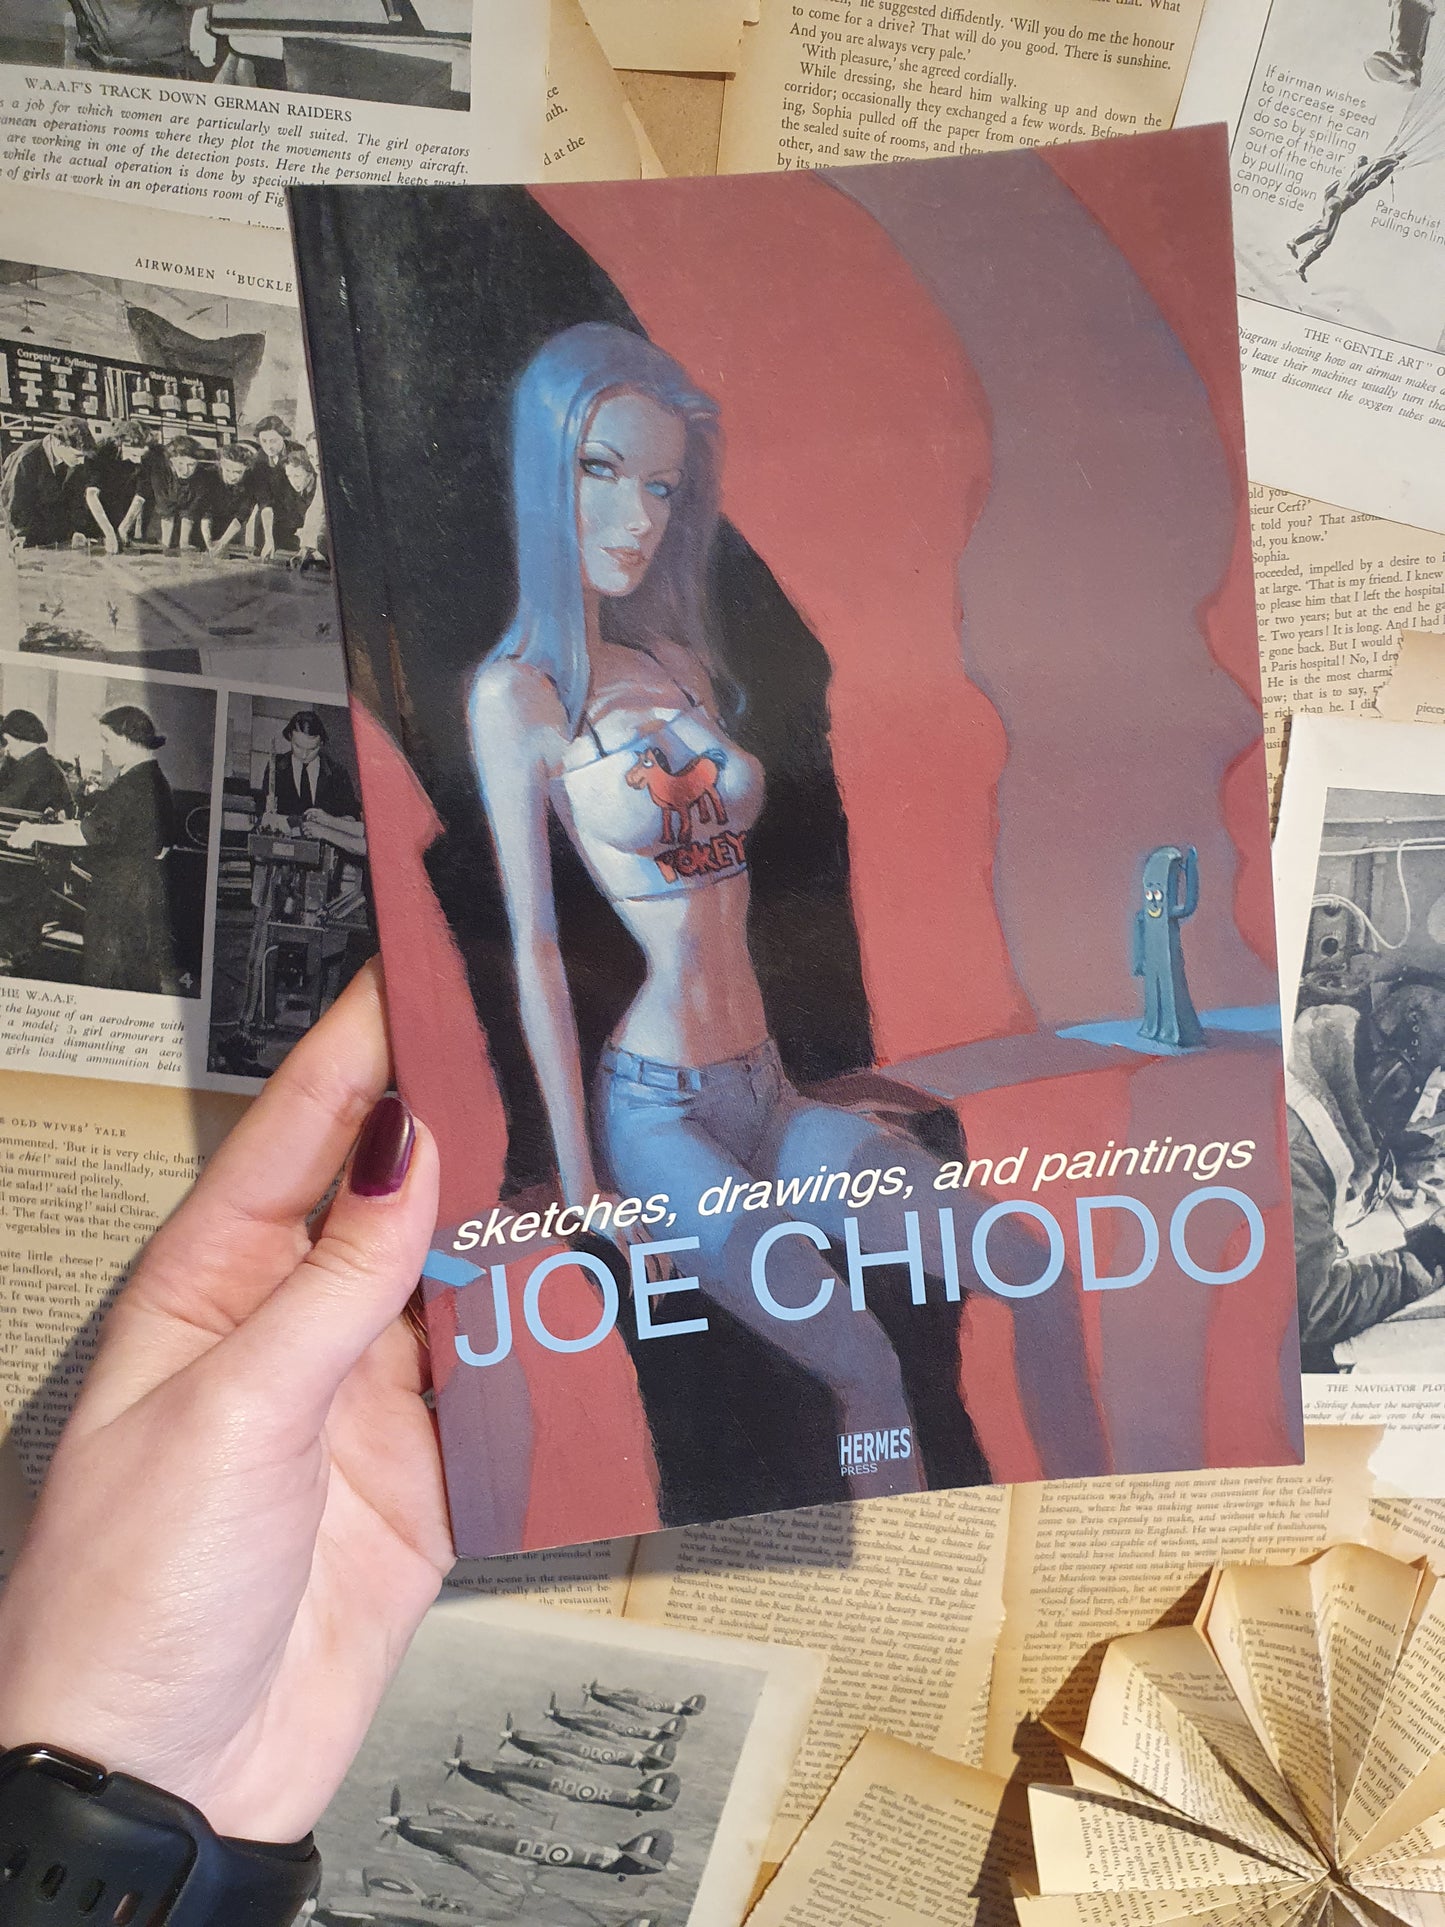 Sketches, Drawings, and Paintings by Joe Chiodo (2006)